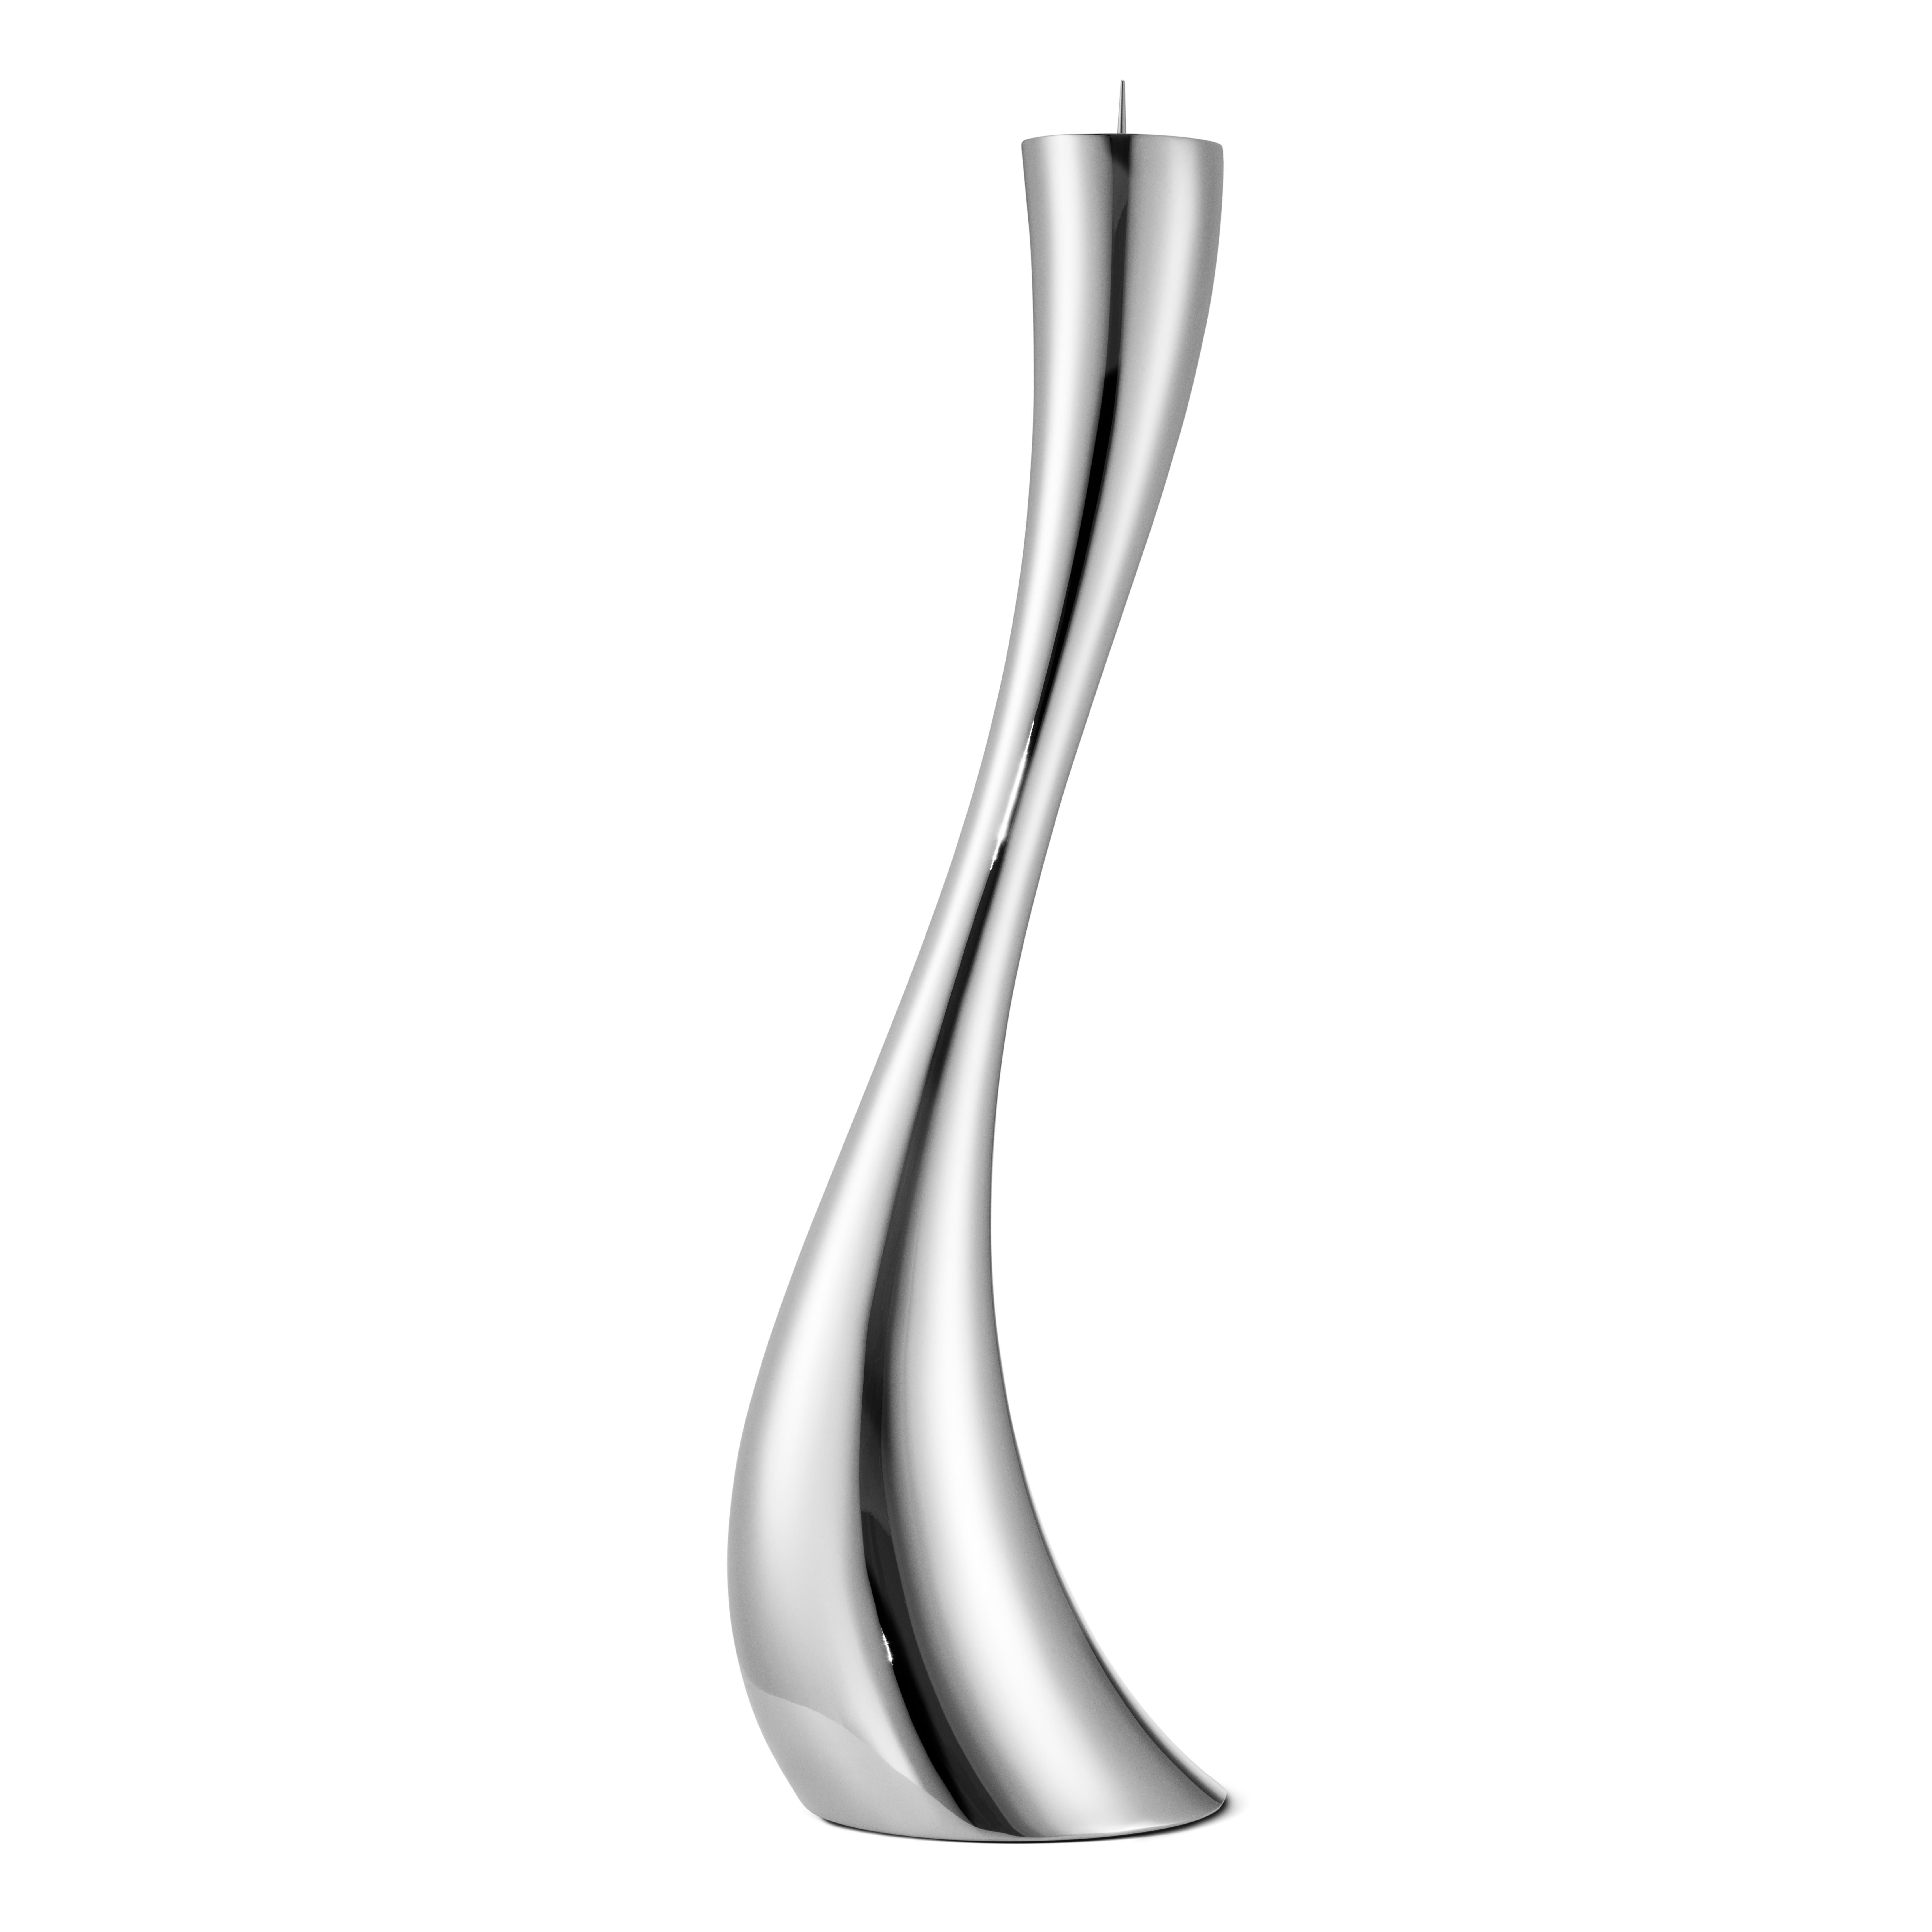 Cobra’s gorgeous spirals take on new dimensions as spectacular floor candleholders. What started as a vision for the tabletop has become a growing family thanks to three candleholders for the floor. Curving upward from its base, Cobra is instantly